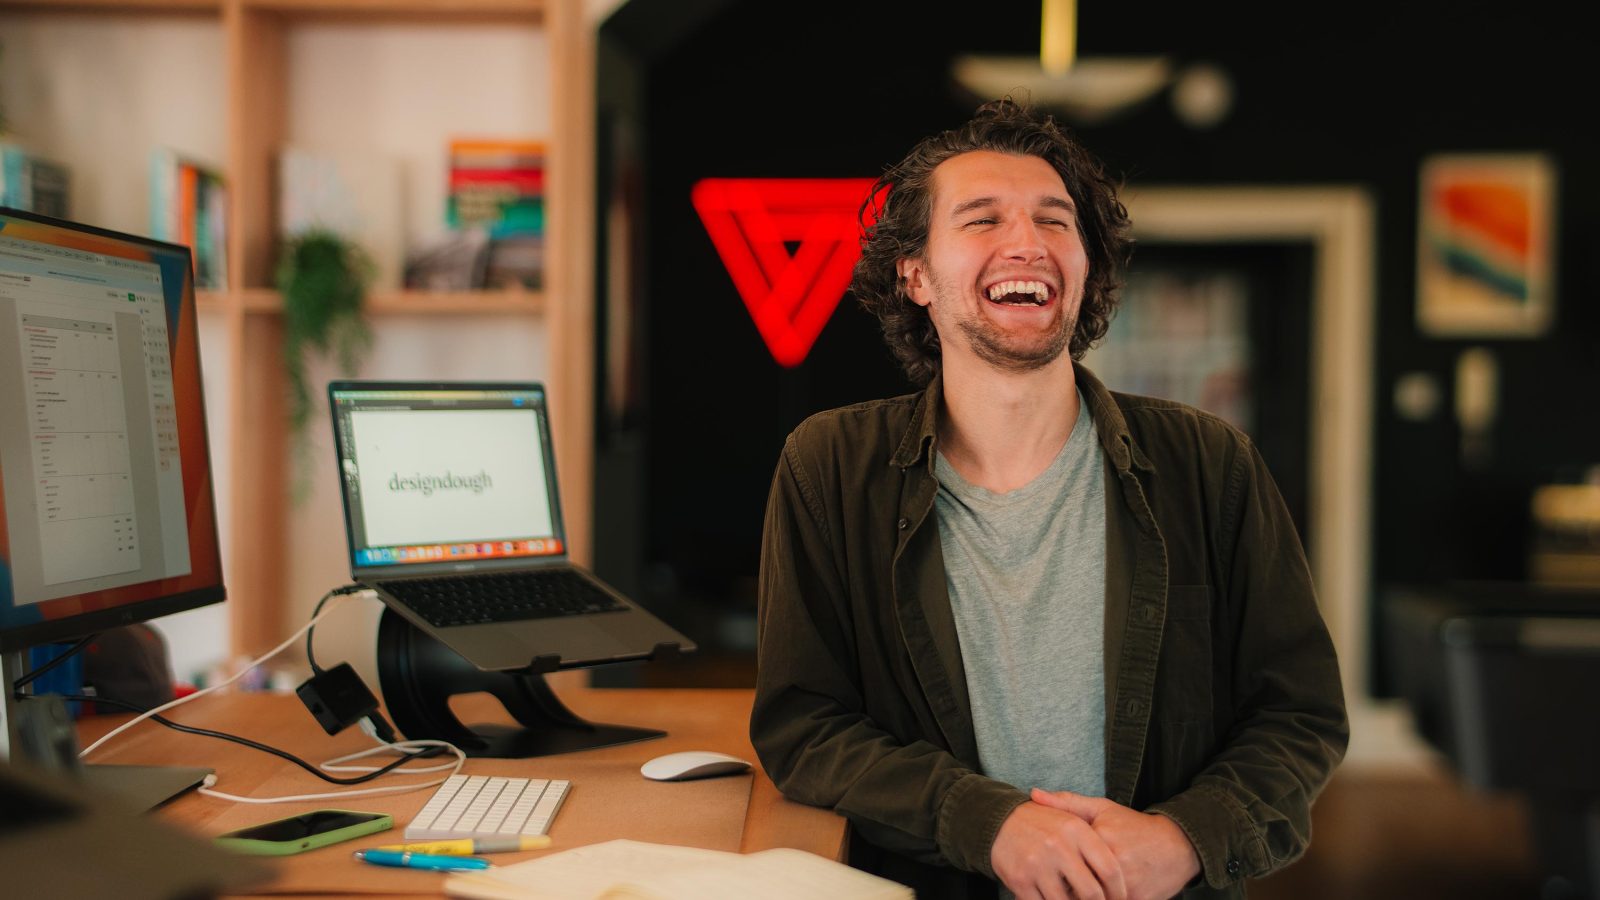 A joyful young man with curly hair laughing in an office setting, with a laptop displaying 